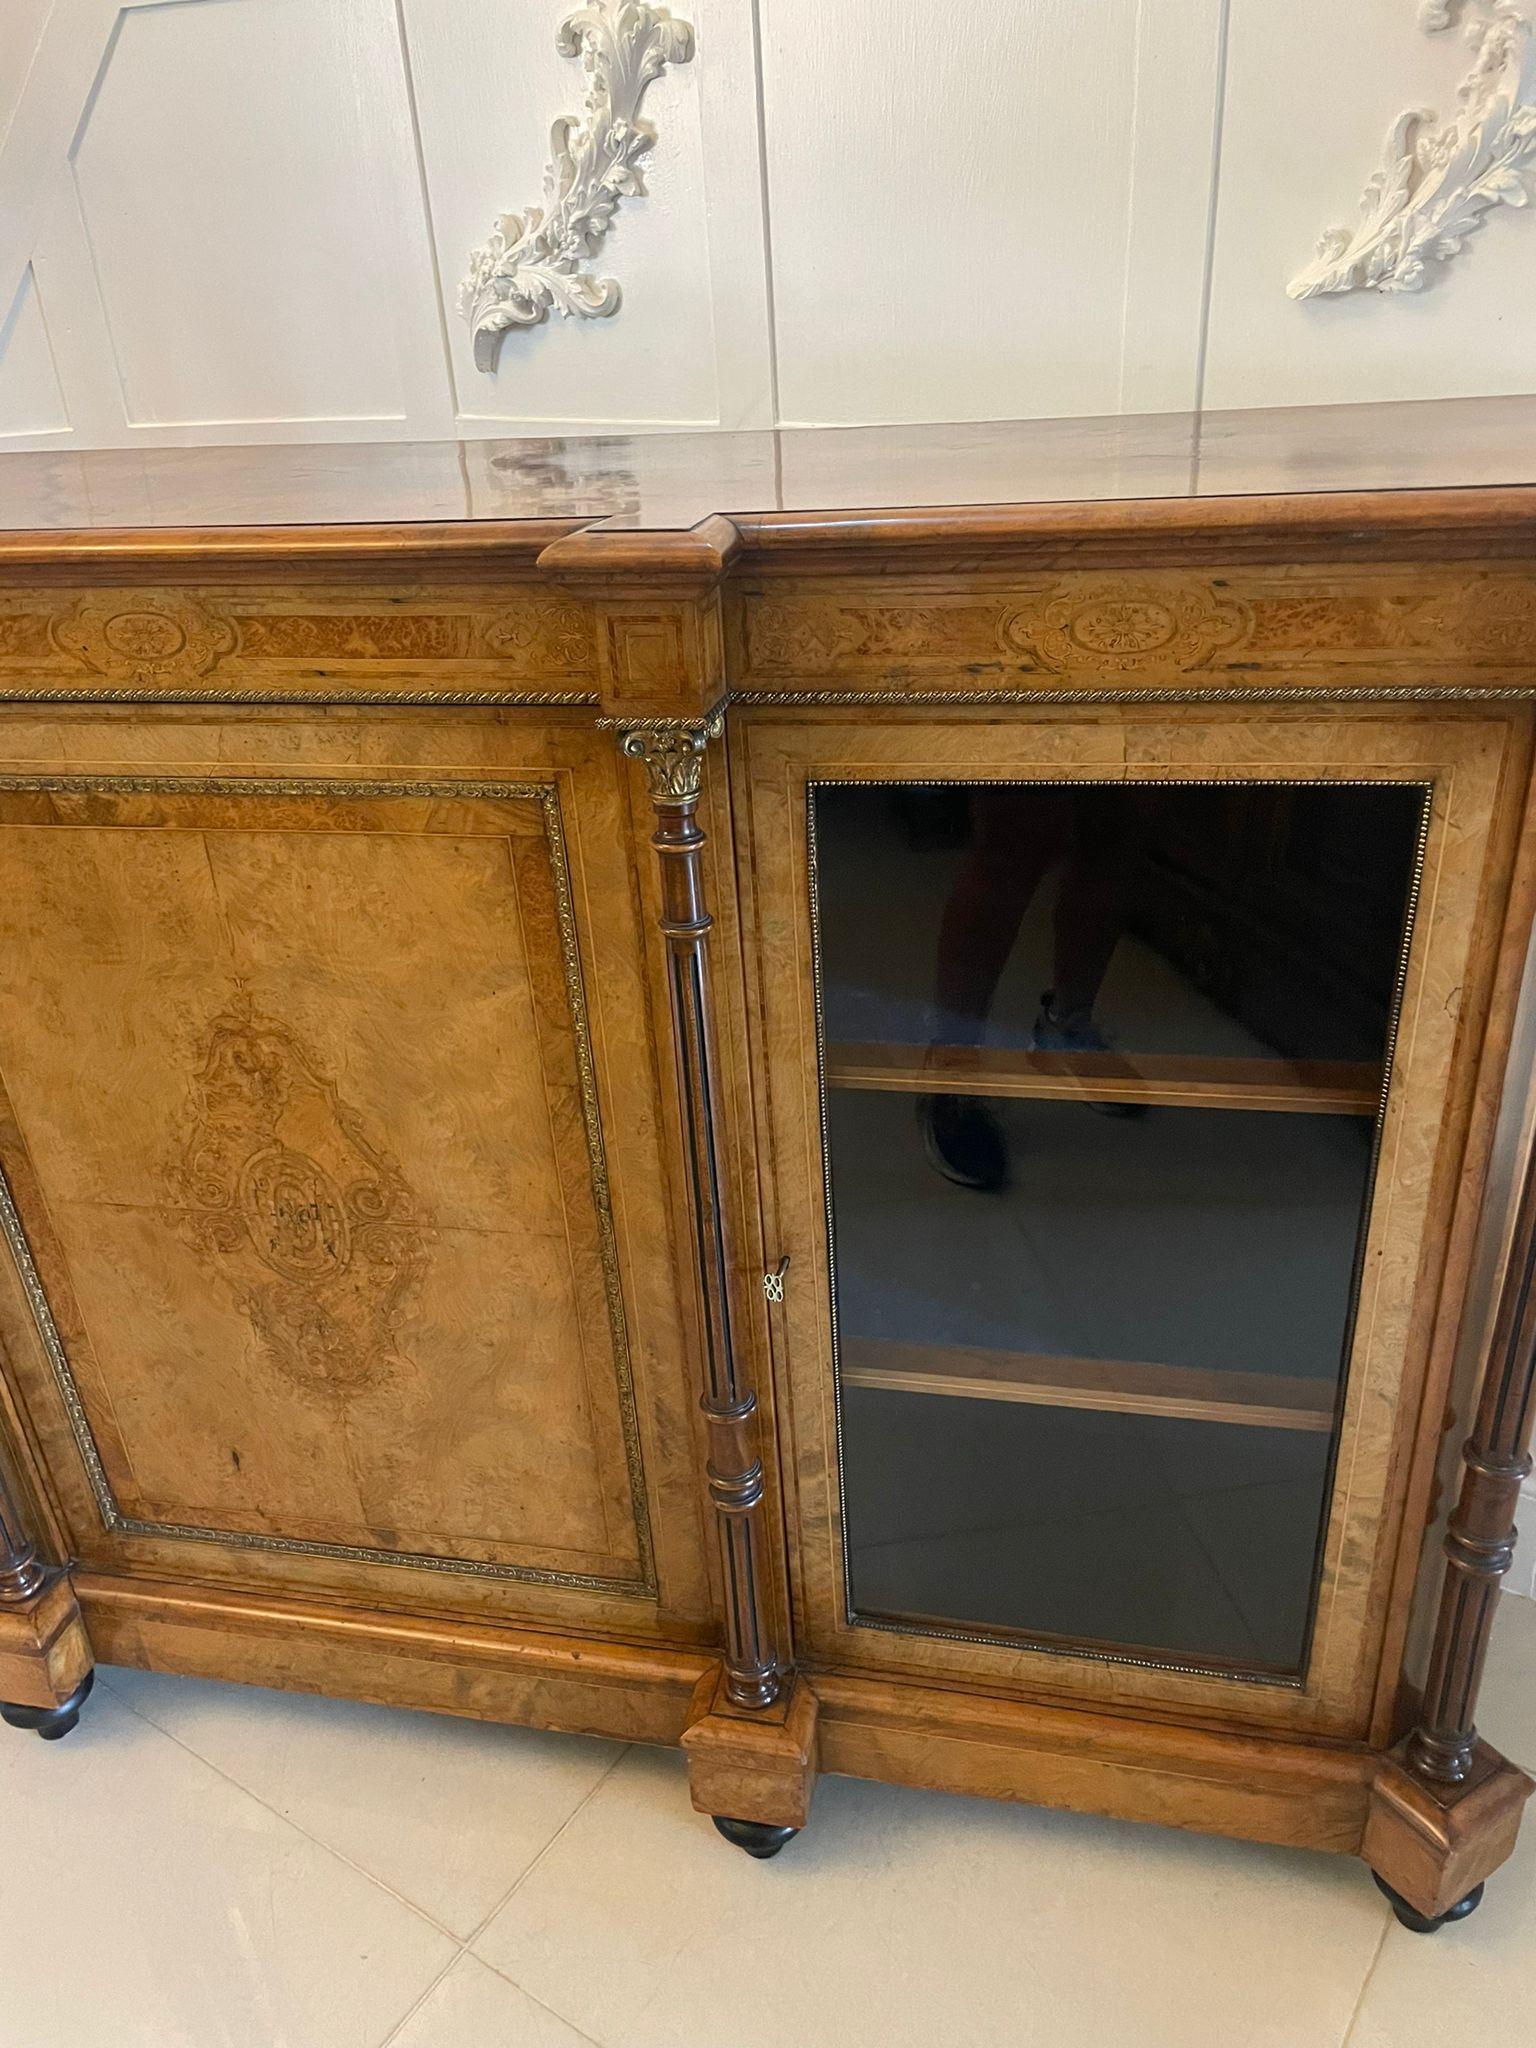 Inlay Outstanding Quality Antique Victorian Burr Walnut Inlaid Credenza/Sideboard For Sale